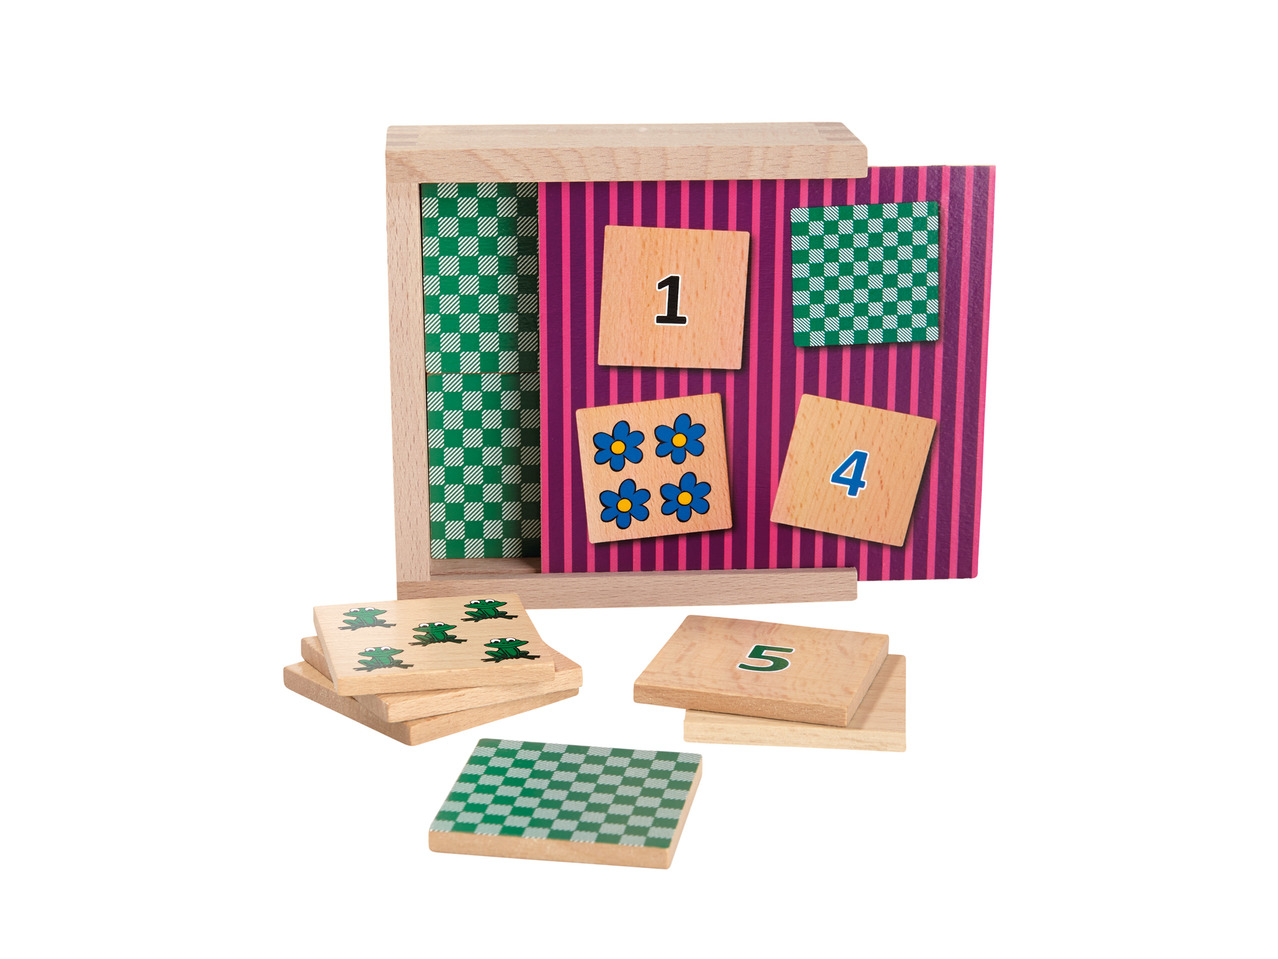 Playtive Junior Wooden Learning Set1